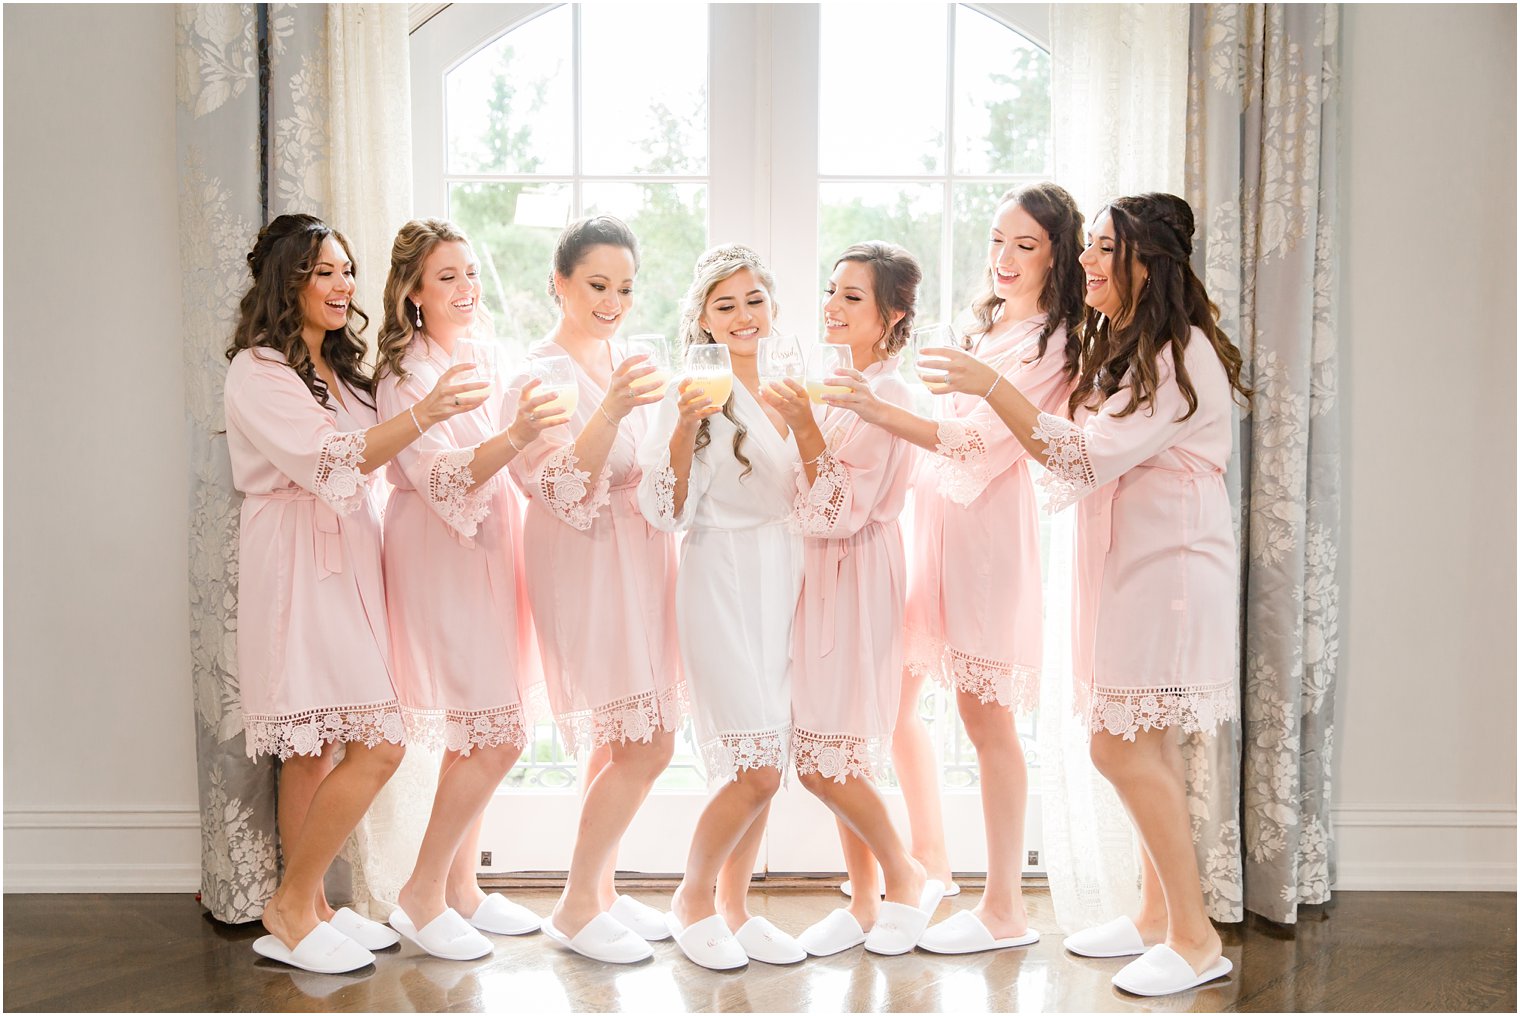 Bride and bridesmaids in robes toasting with champagne